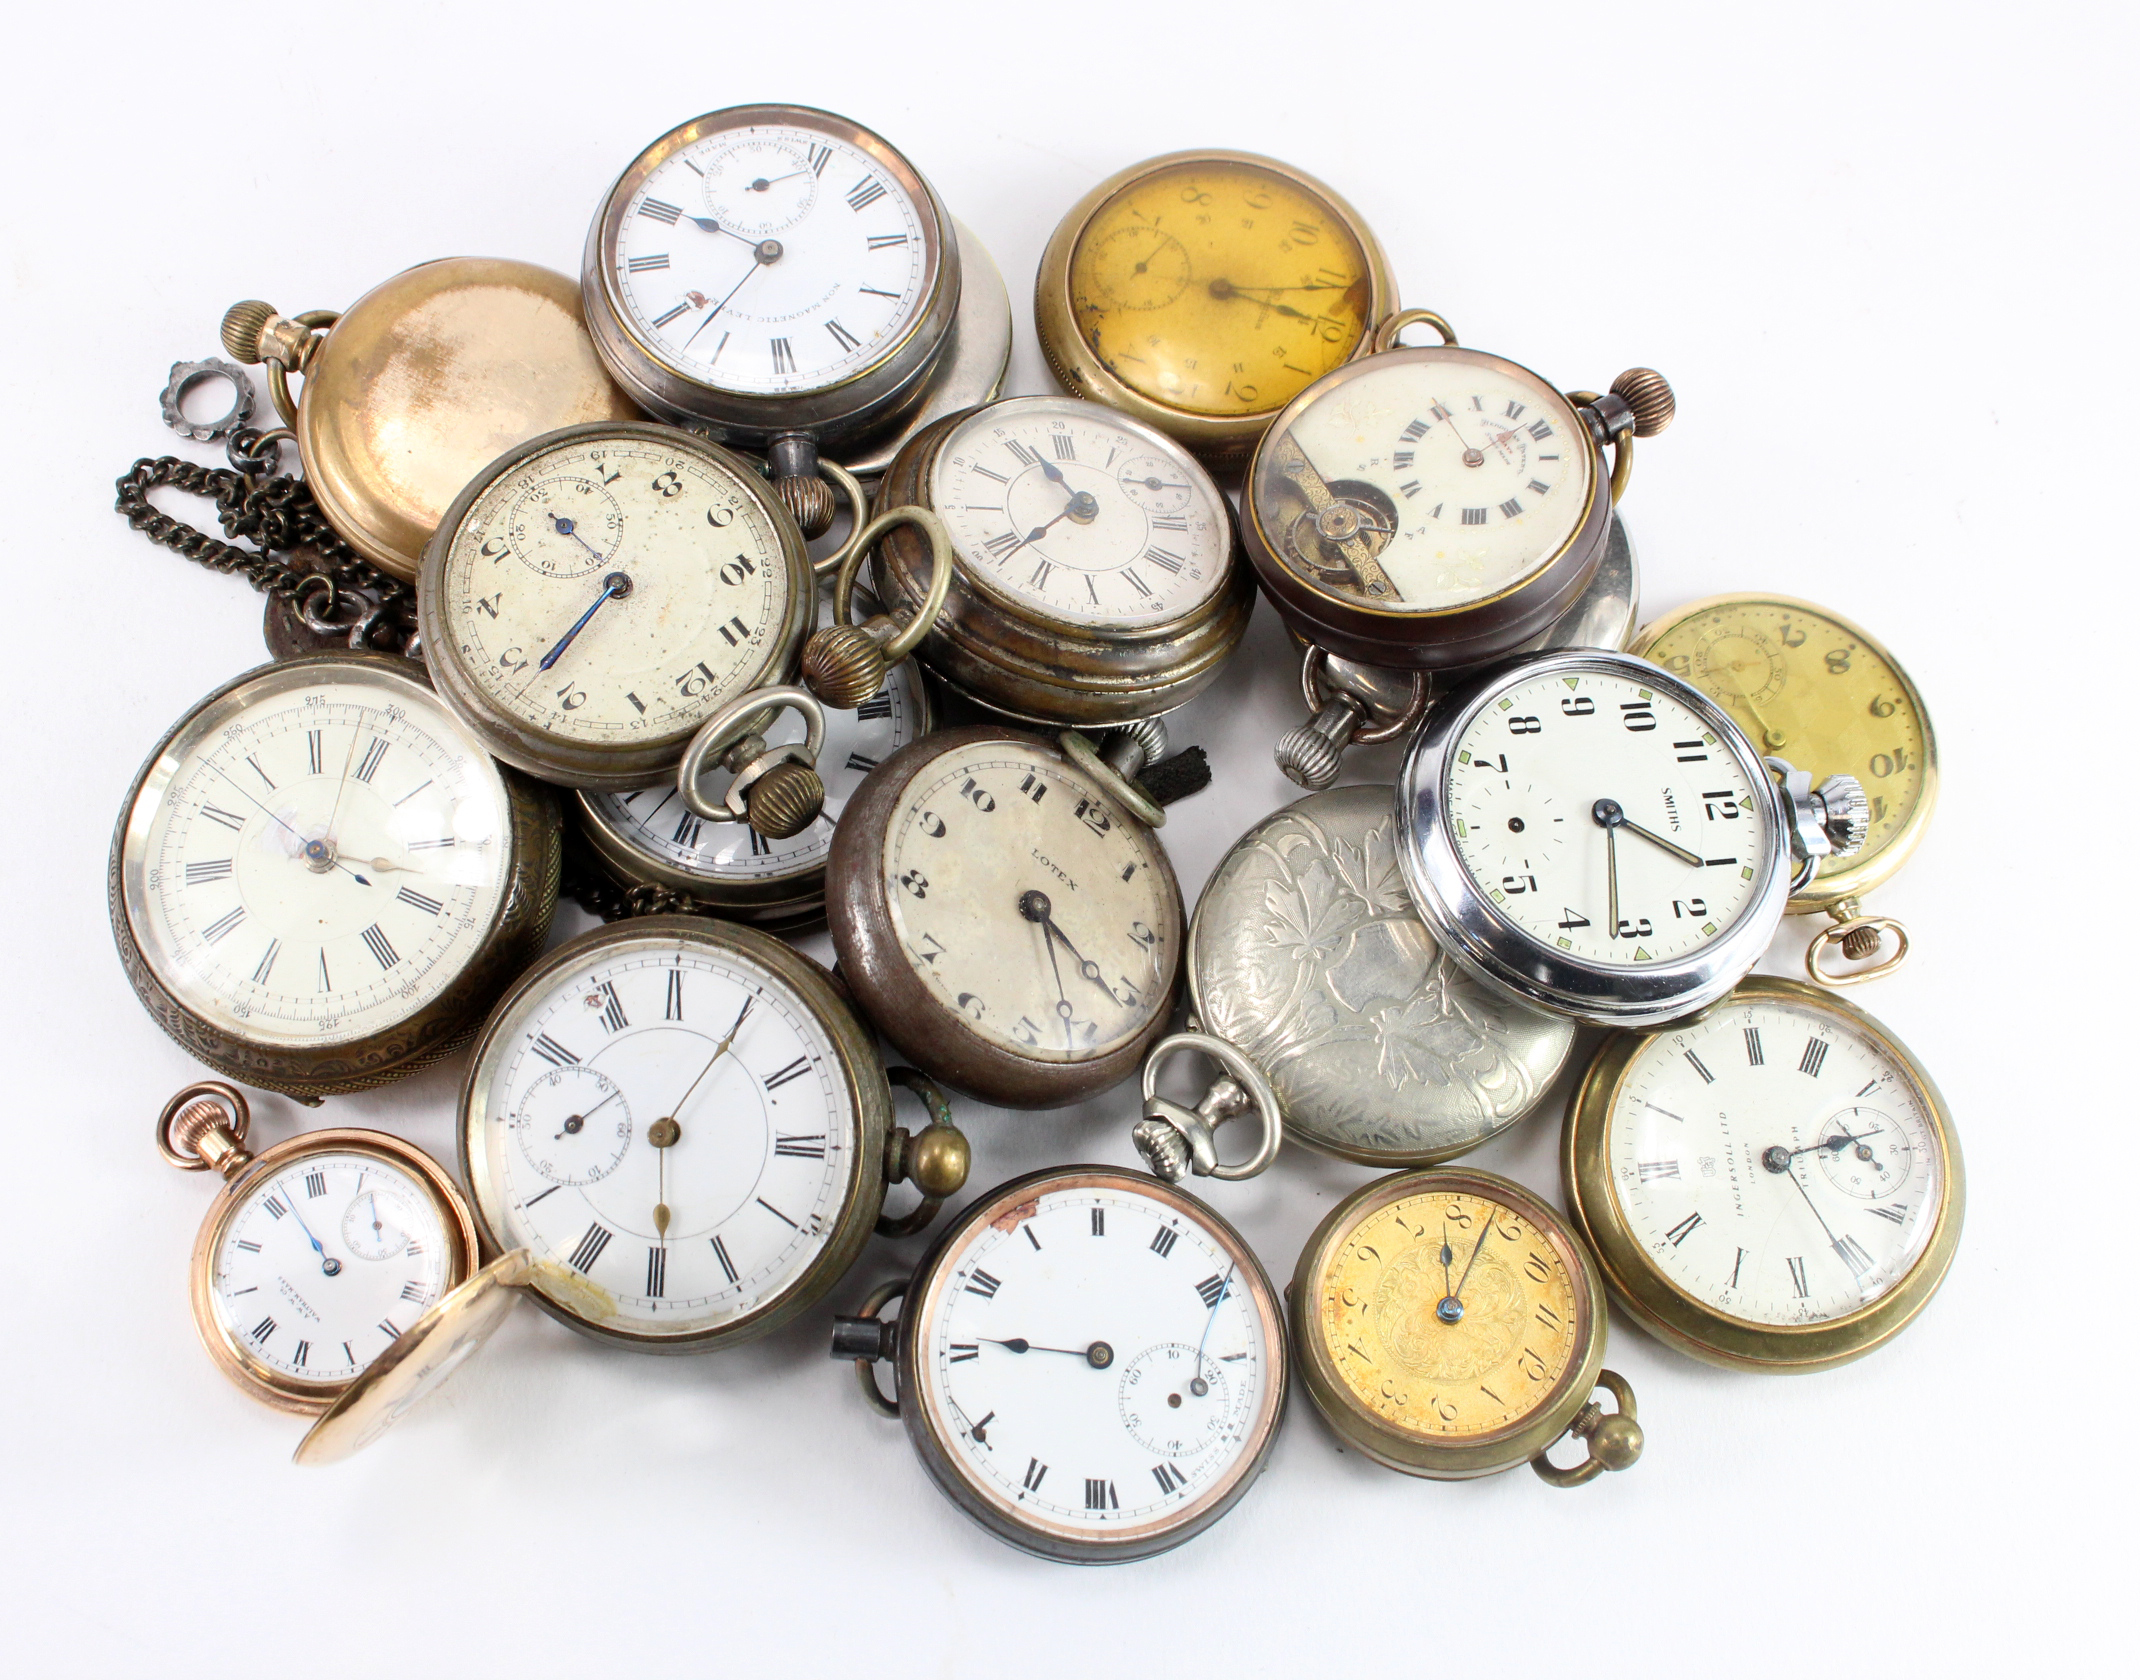 Nineteen gents pocket watches, all seem to be base metal examples.